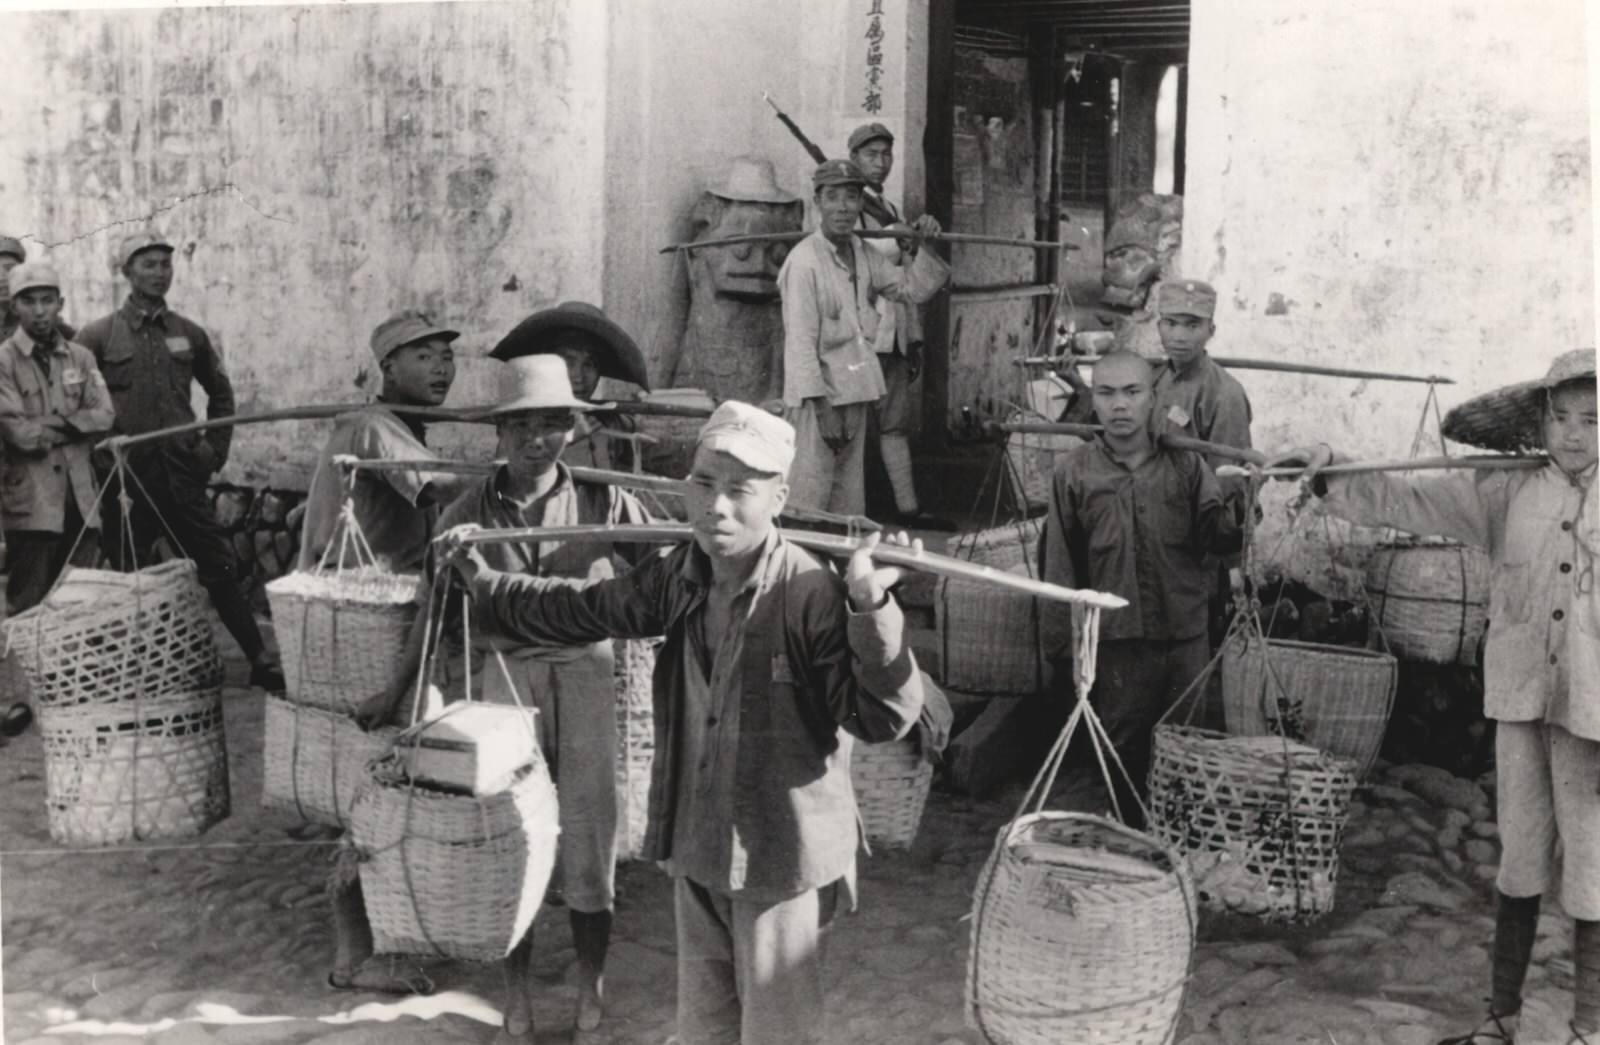 Soldiers and civilians come to a Field Hospital at Lihwang (Lihuang), Anhwei (Anhui), bearing gifts from civilians for the Army sick and wounded. 1937-1940